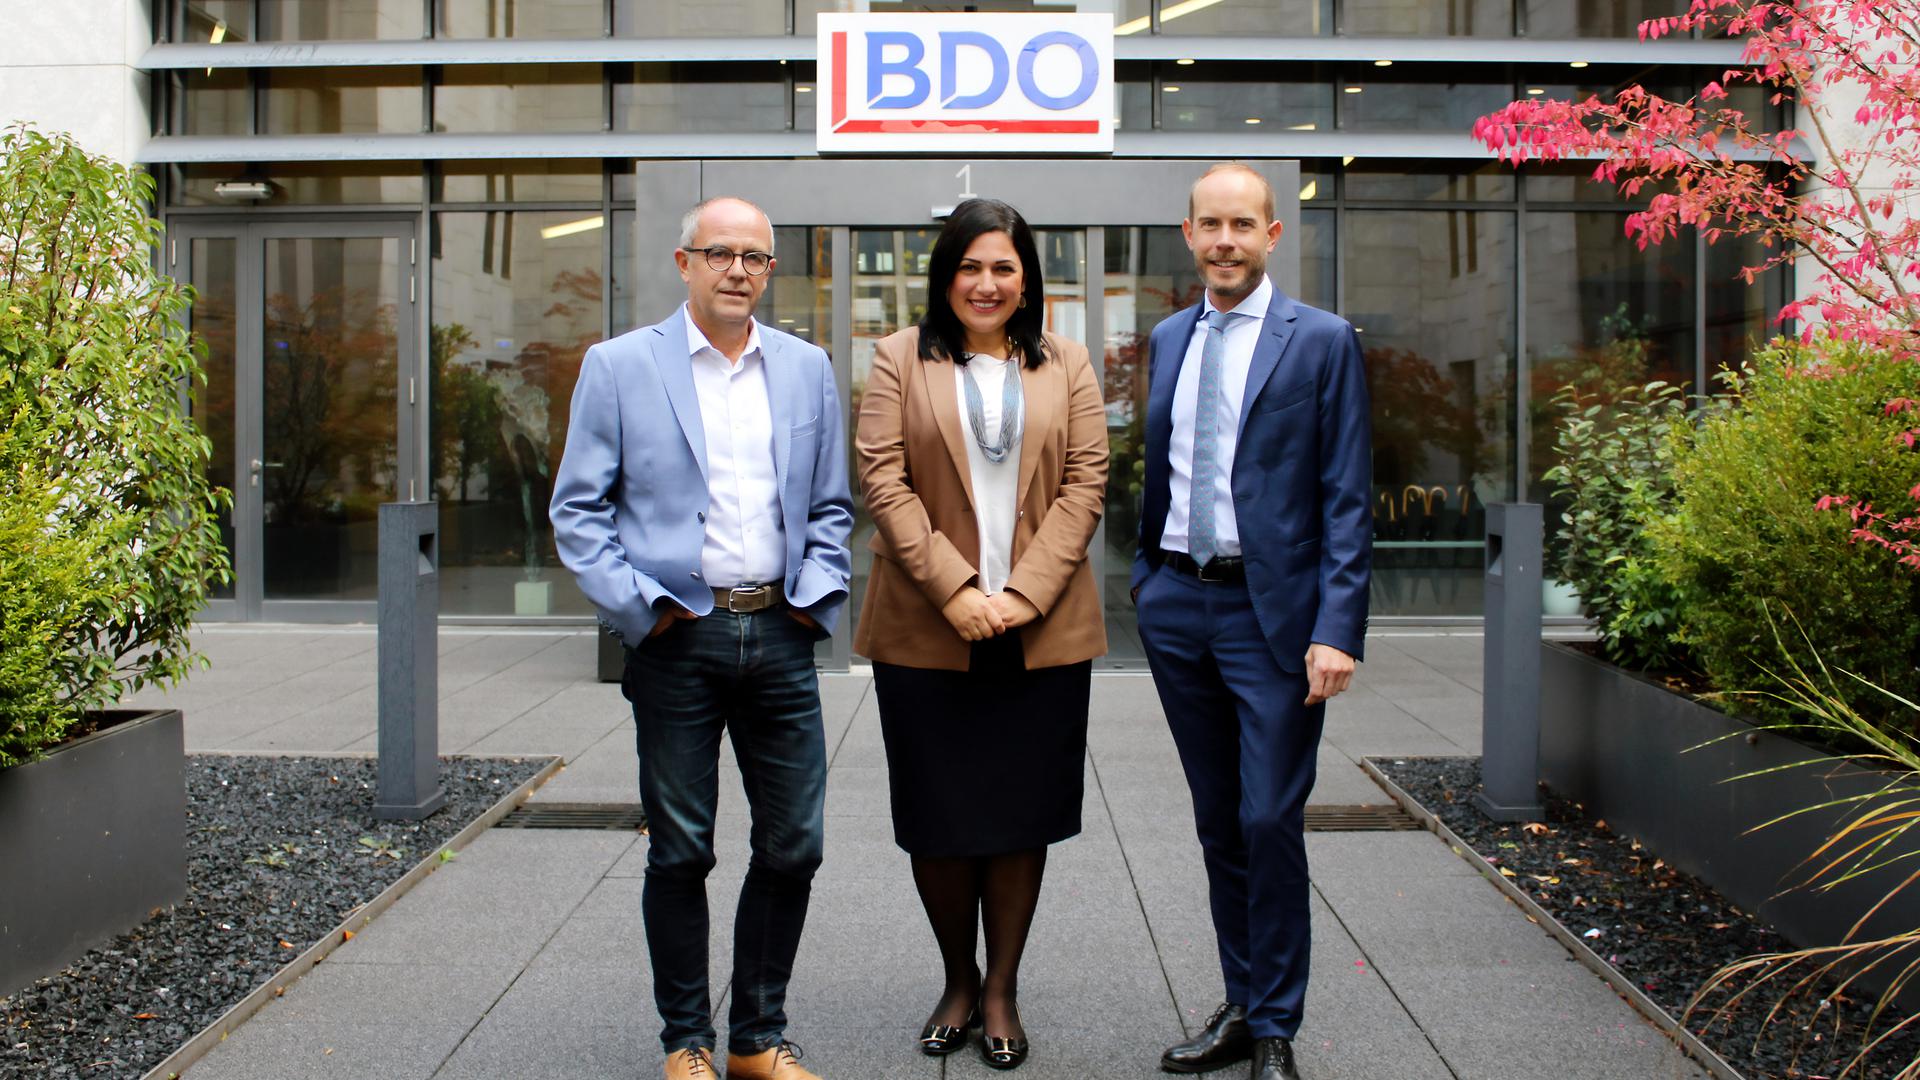 From left to right: Eric Bineau, Adina Conner and Jan Brosius, who have been named as new partners at BDO Luxembourg